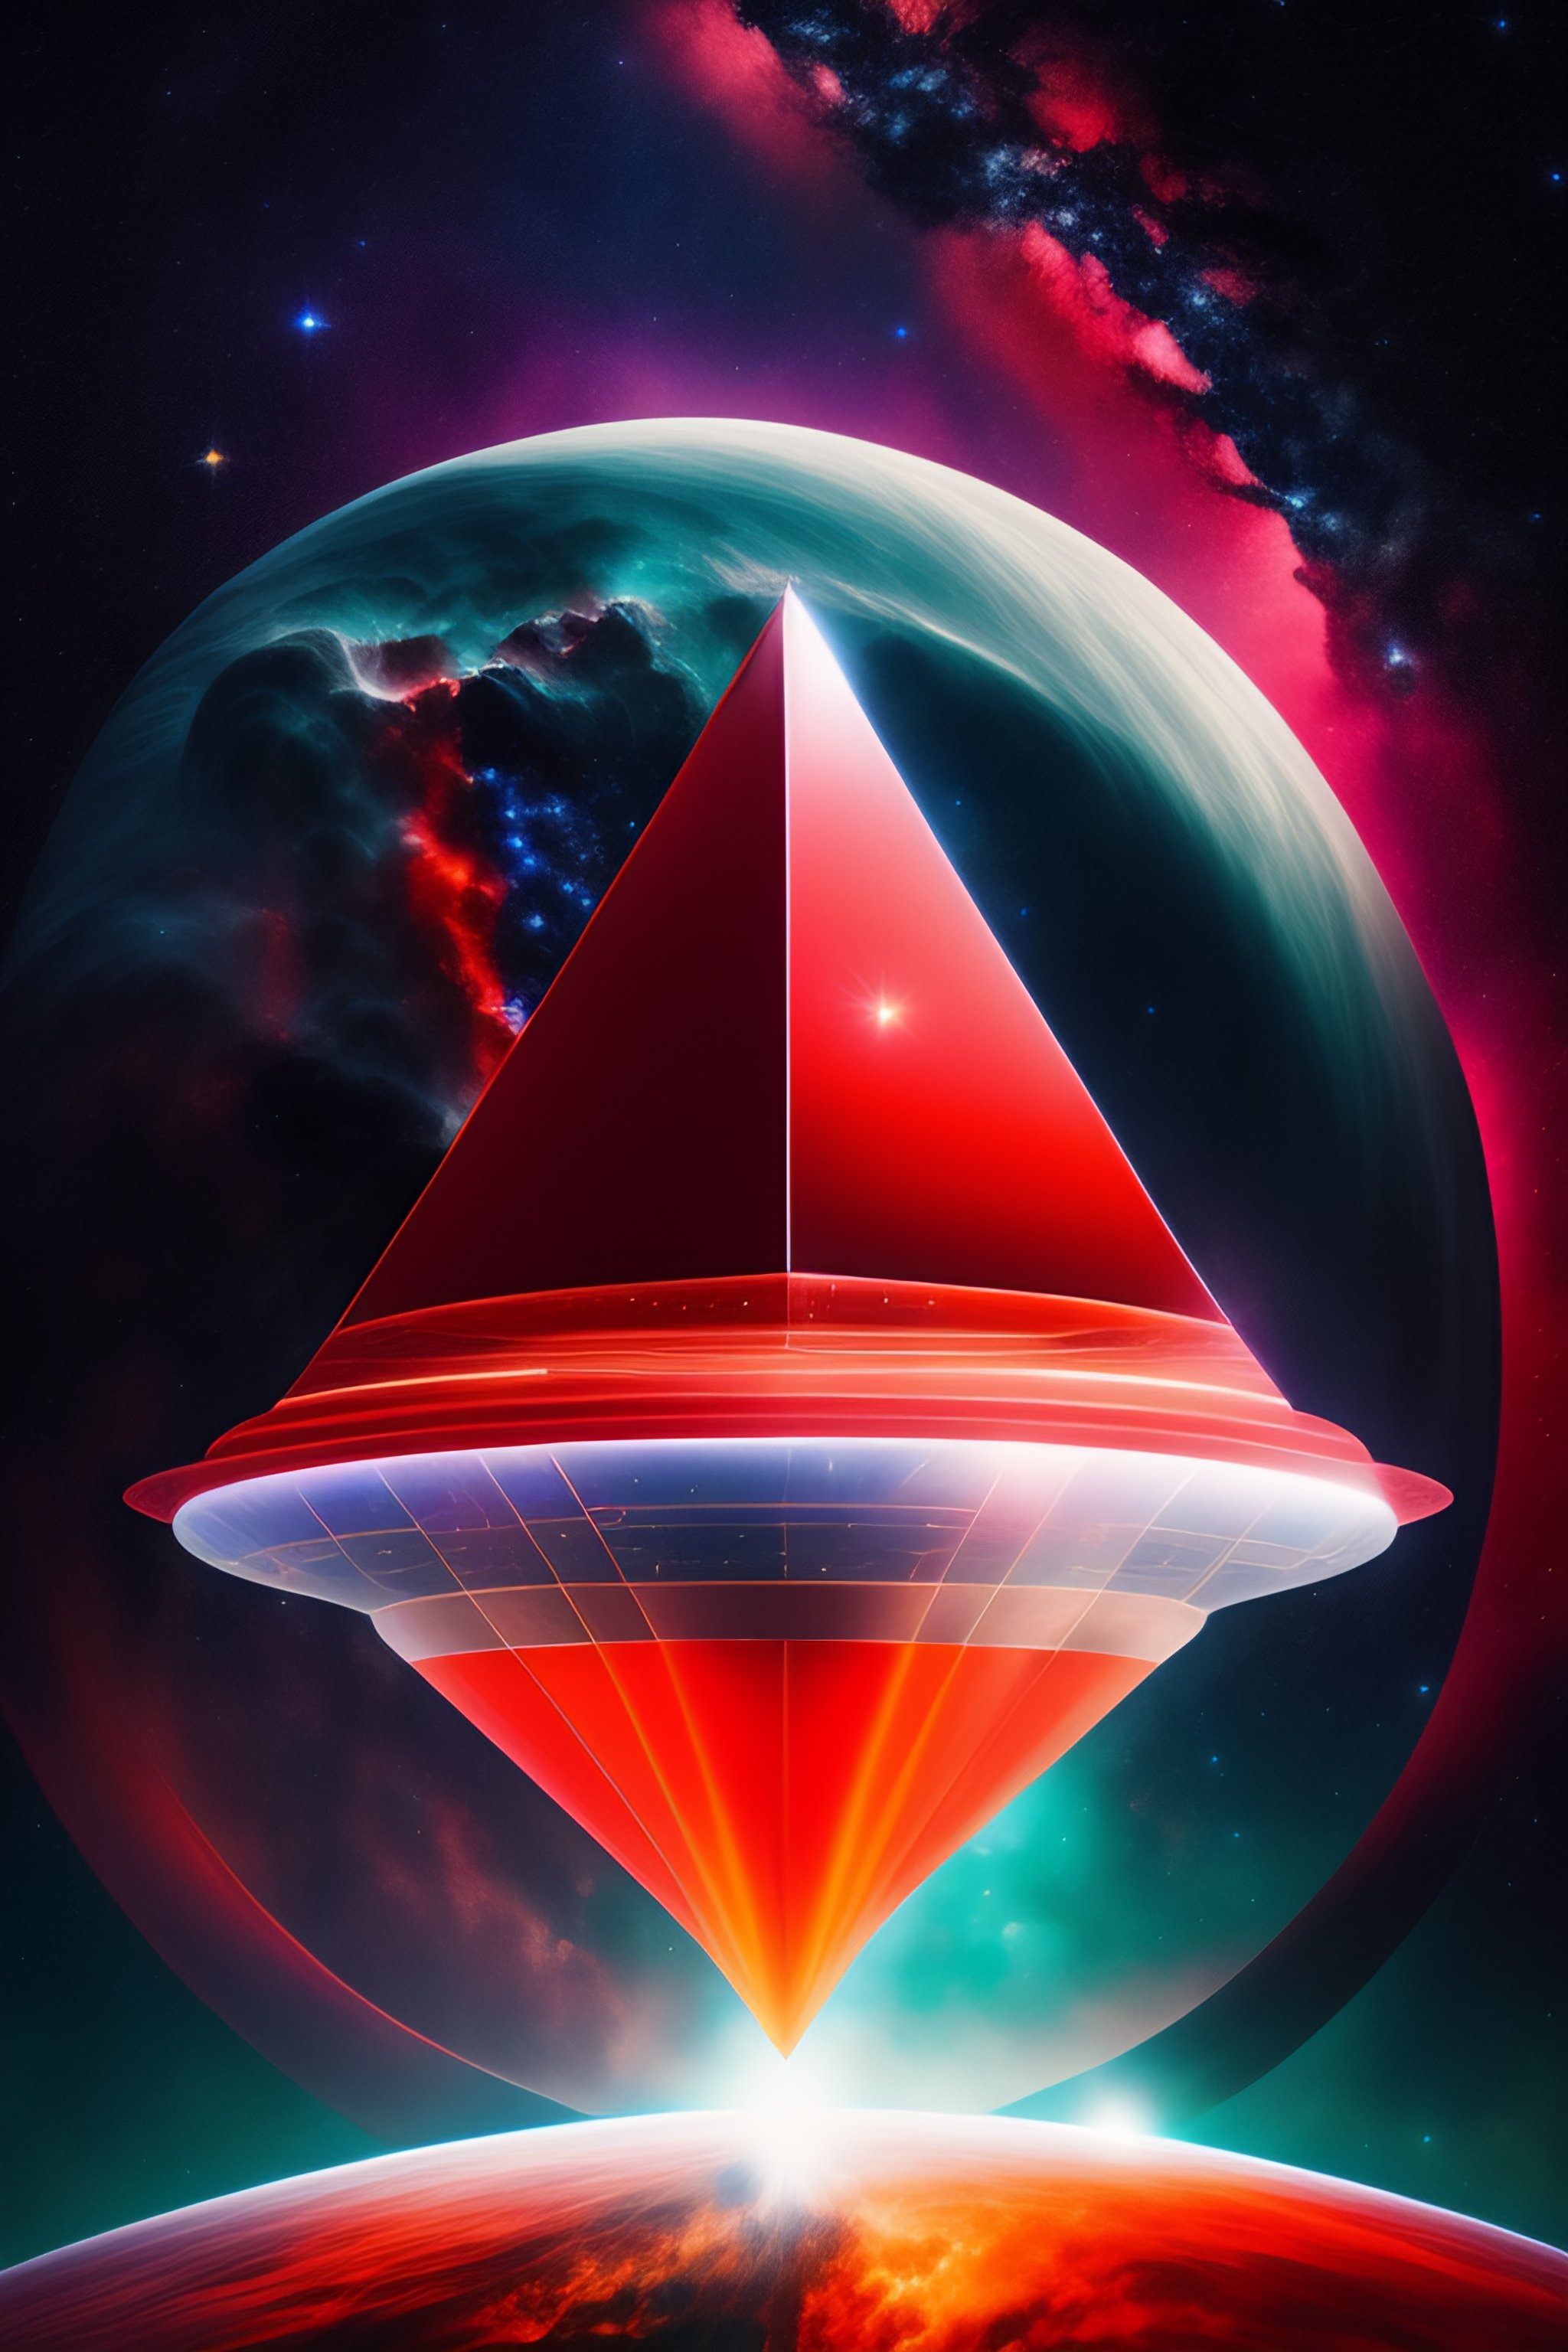 lexica-metallic-red-triangular-prism-artifact-floating-in-space-with